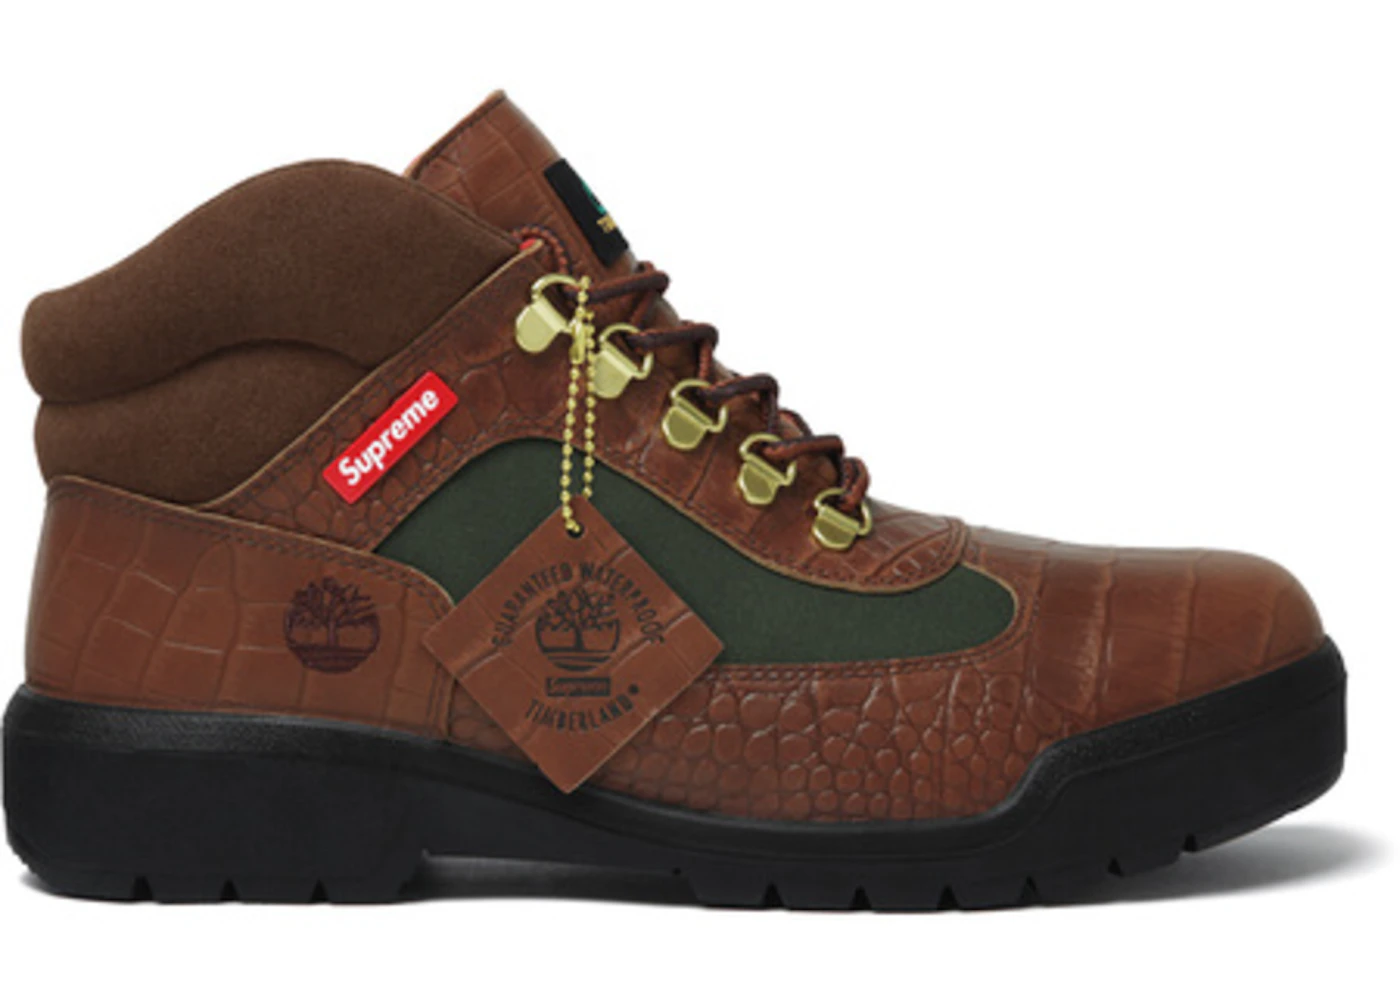 Timberland Field Boot Supreme Brown